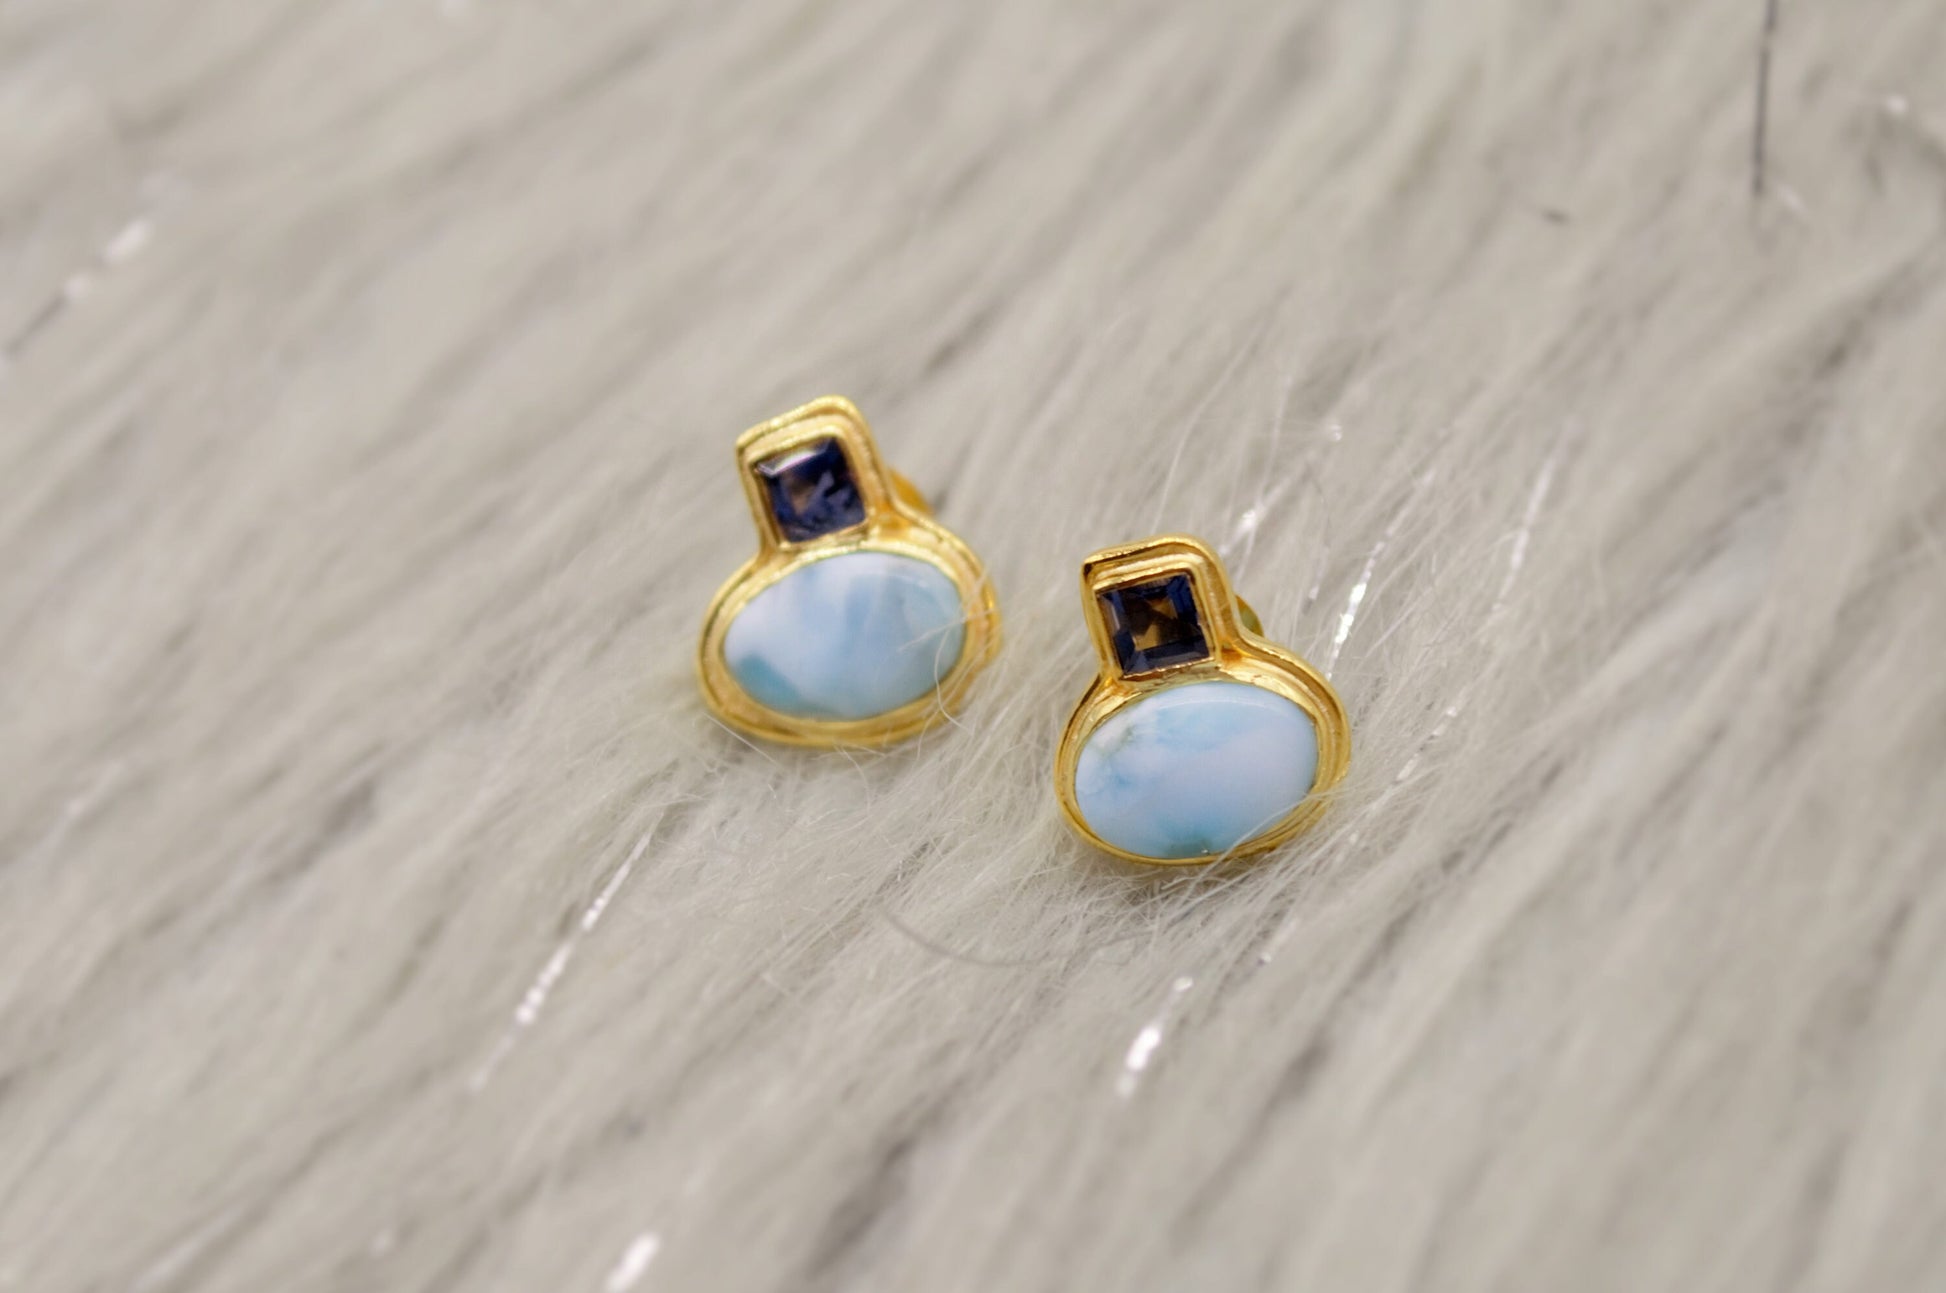 Larimar Earrings, Iolite and Larimar Gemstone, Gold Plated Sterling silver, Dainty Studs Earrings, Handmade Birthday Gift For Her